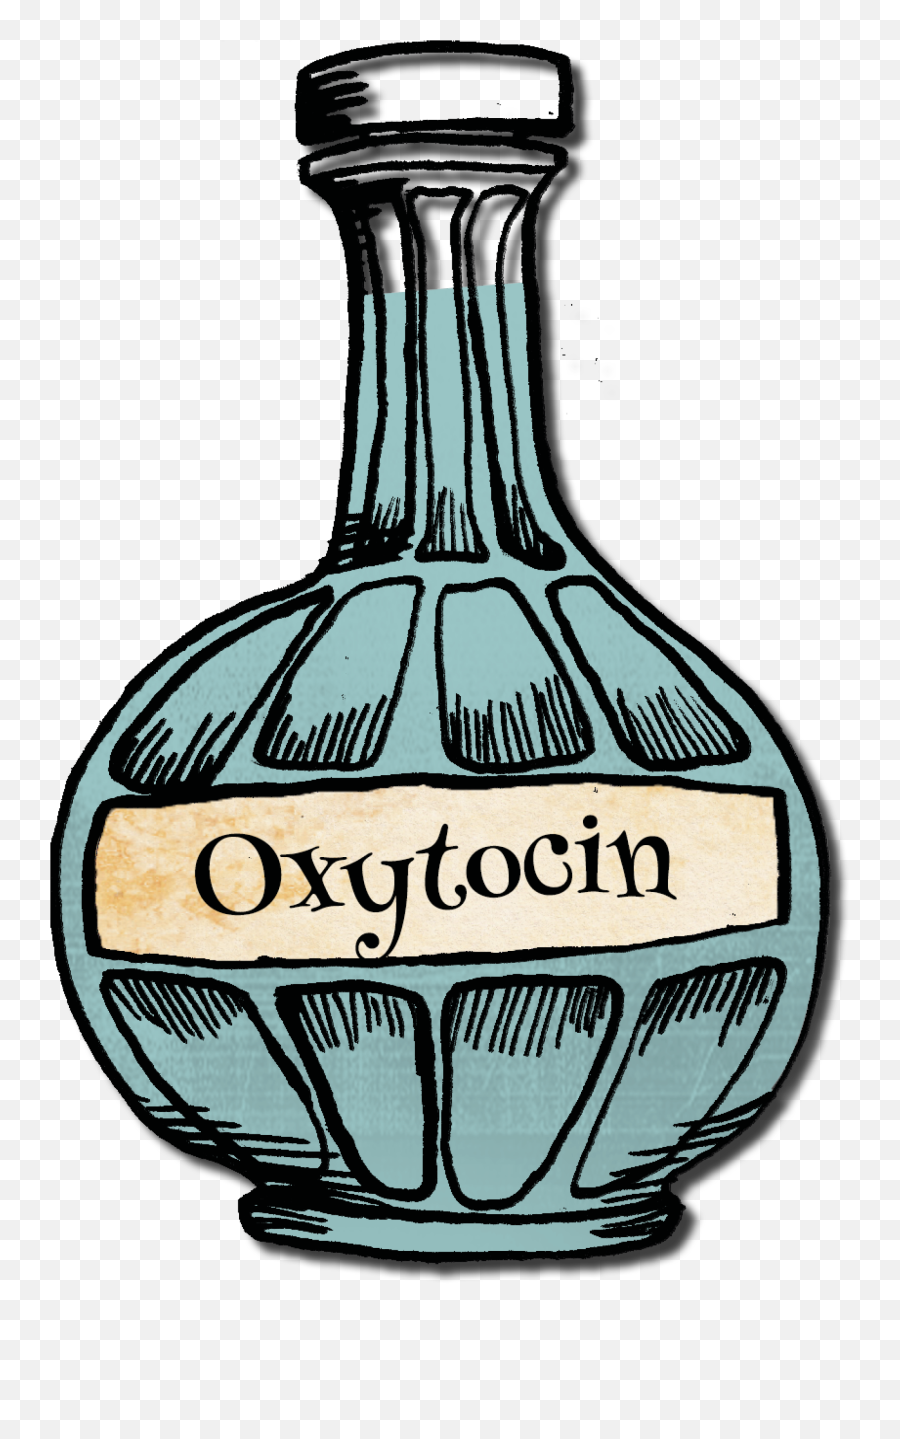 Day Five Oxytocin - The Power Of Love Young Scot Oxytocin Clipart Emoji,Brain Chemicals And Emotions